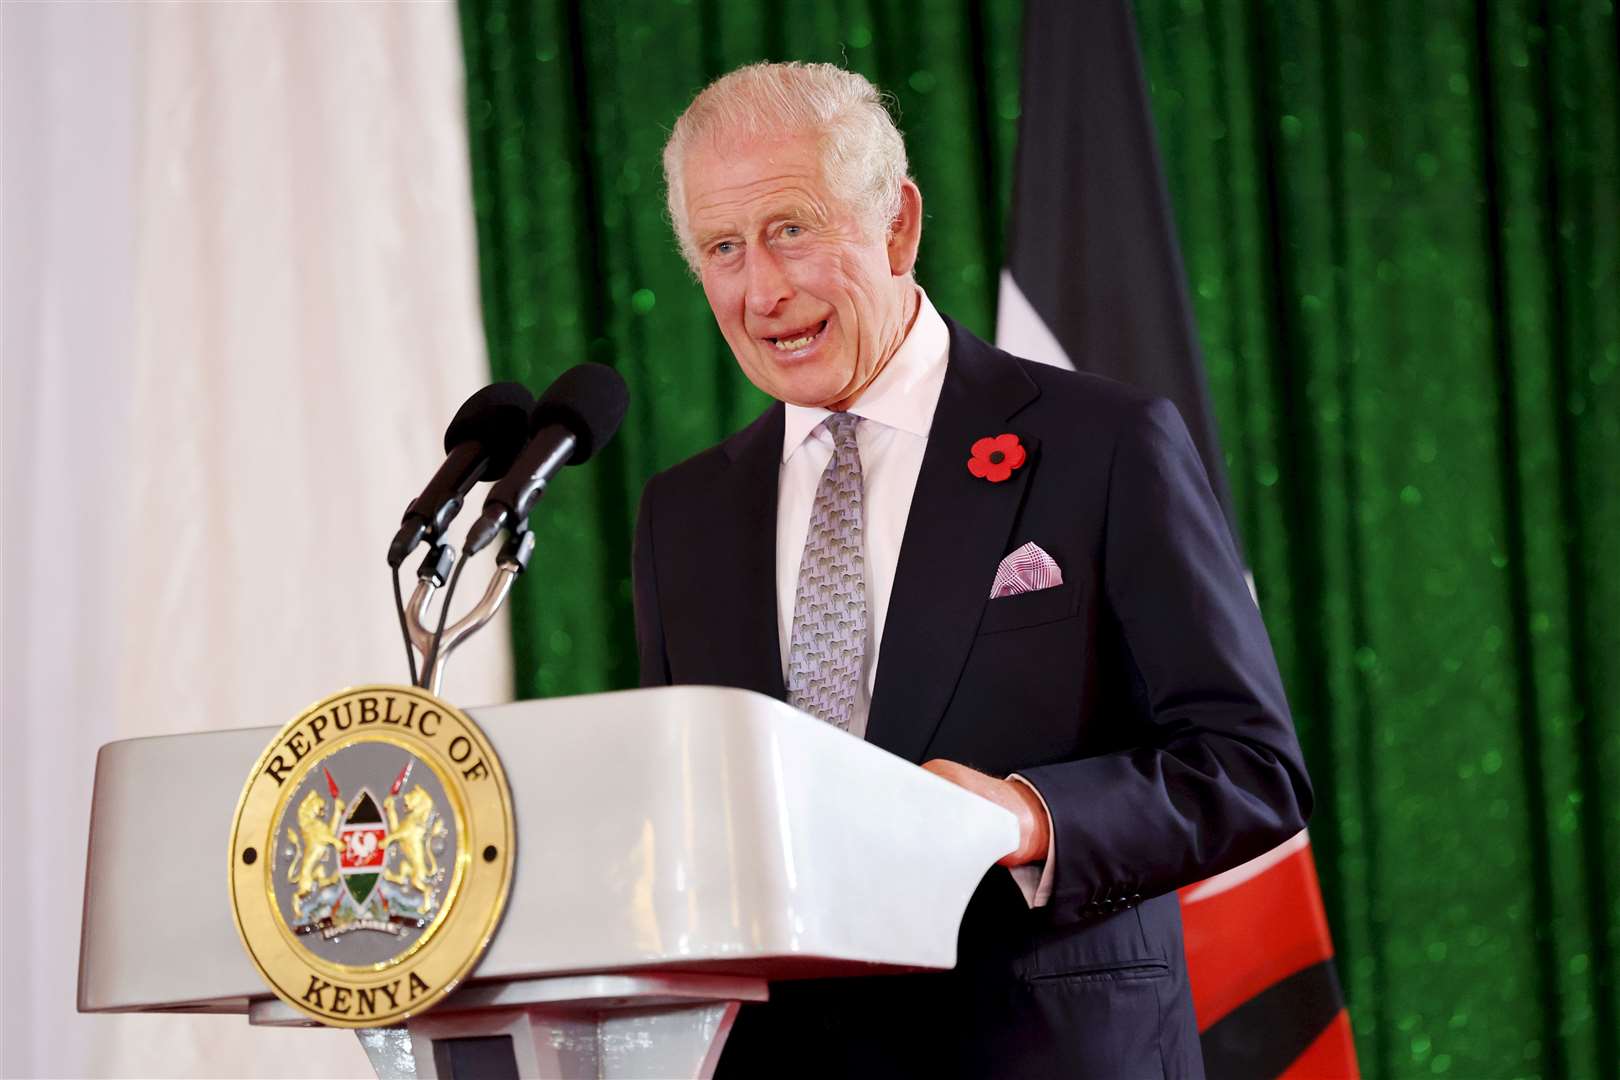 The King speaking at a state banquet in Nairobi on Tuesday (Chris Jackson/PA)